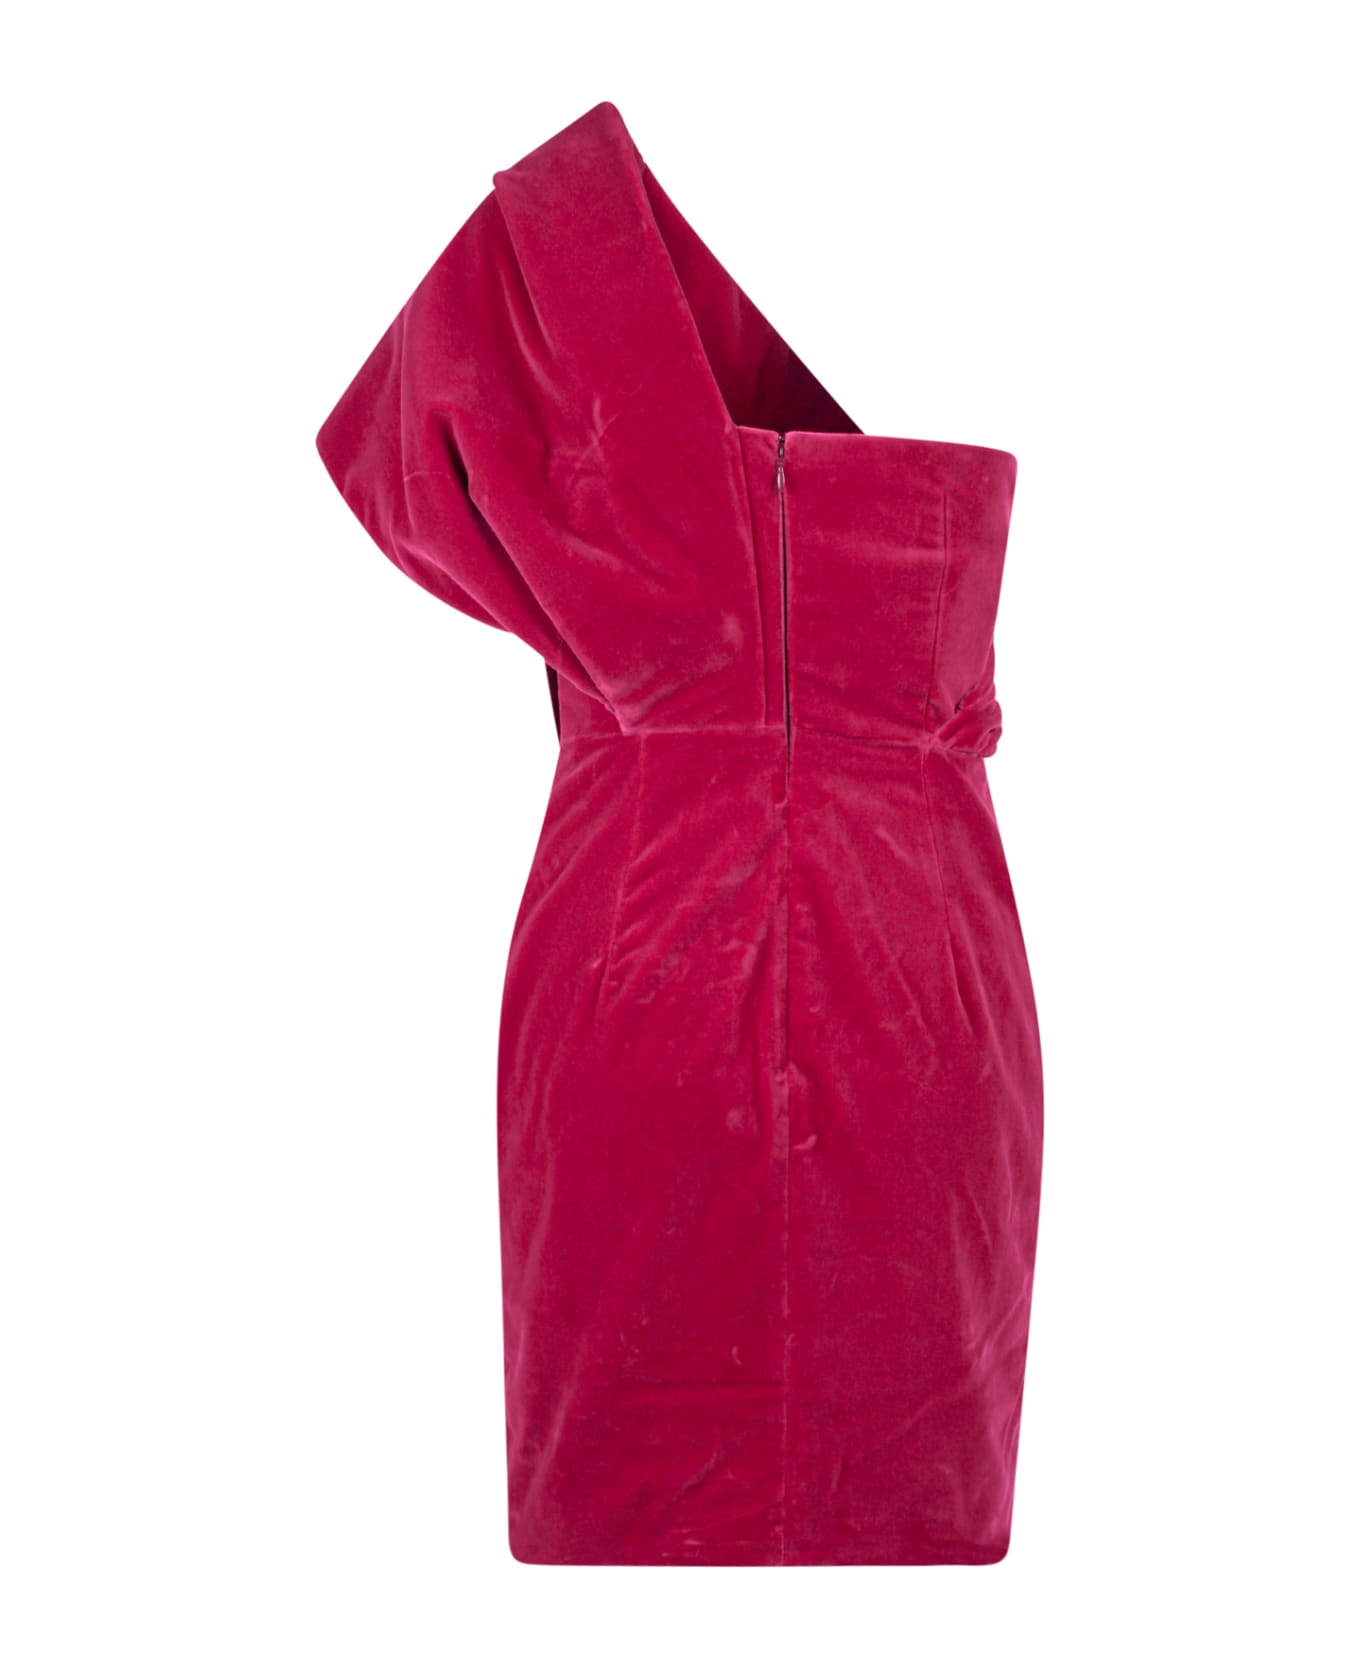 Tom Ford Dress - RED